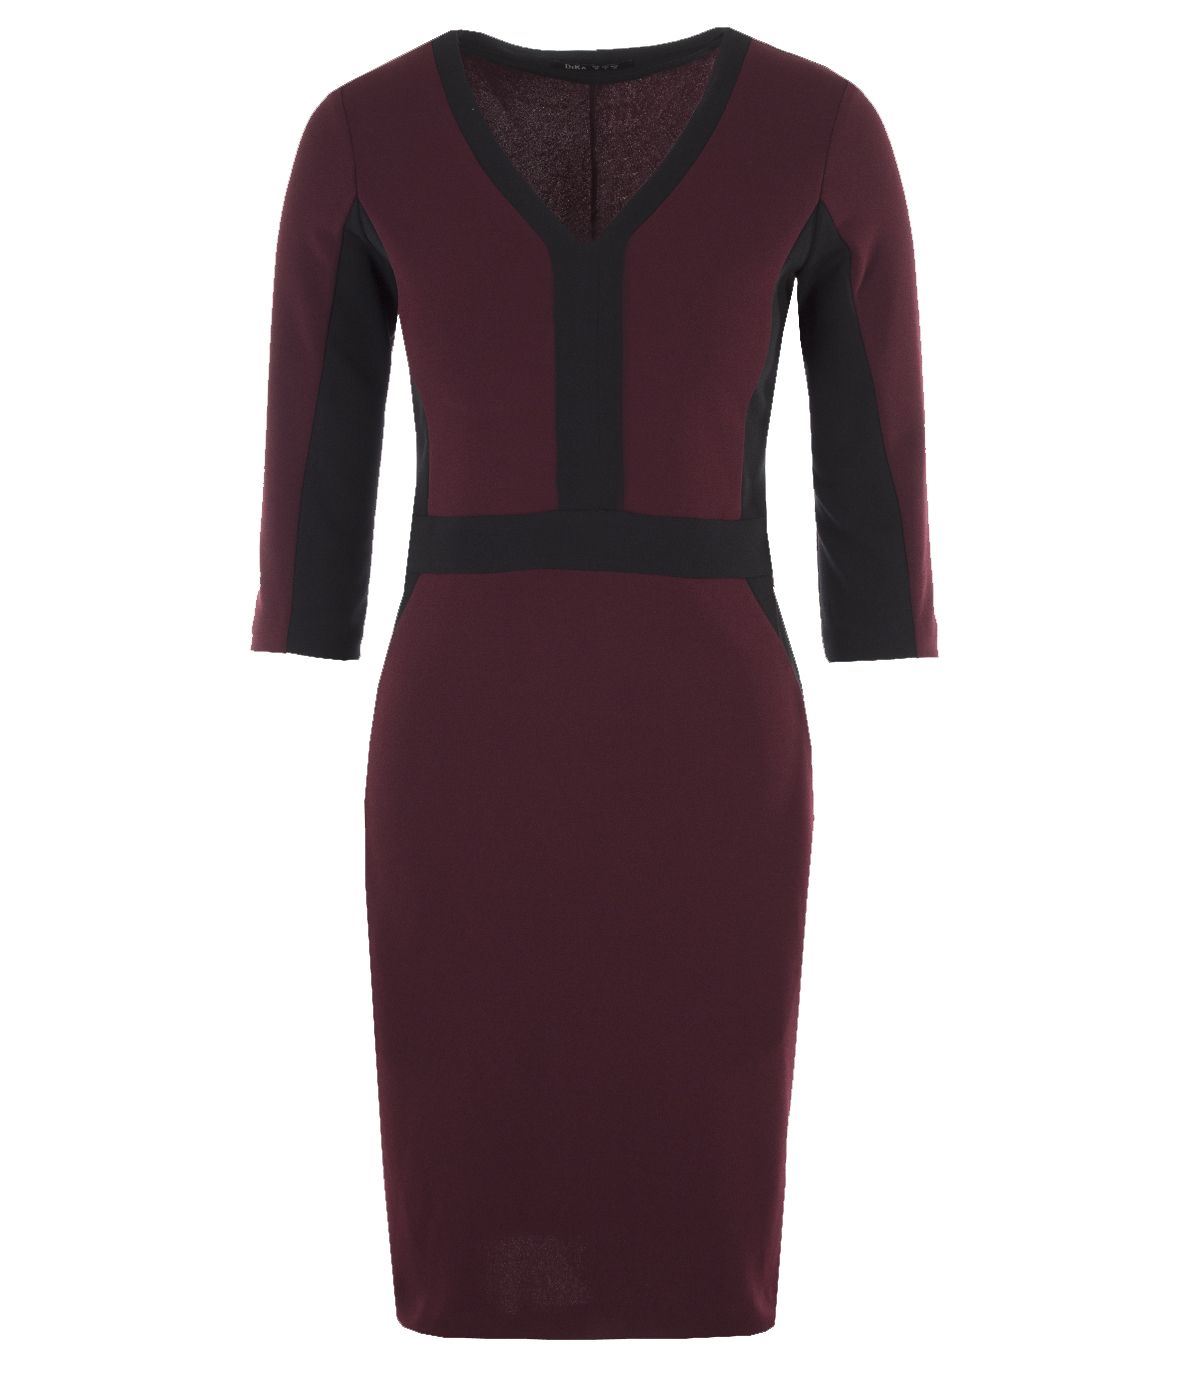 Bodycon dress in two contrasting colors, with V-neck  0